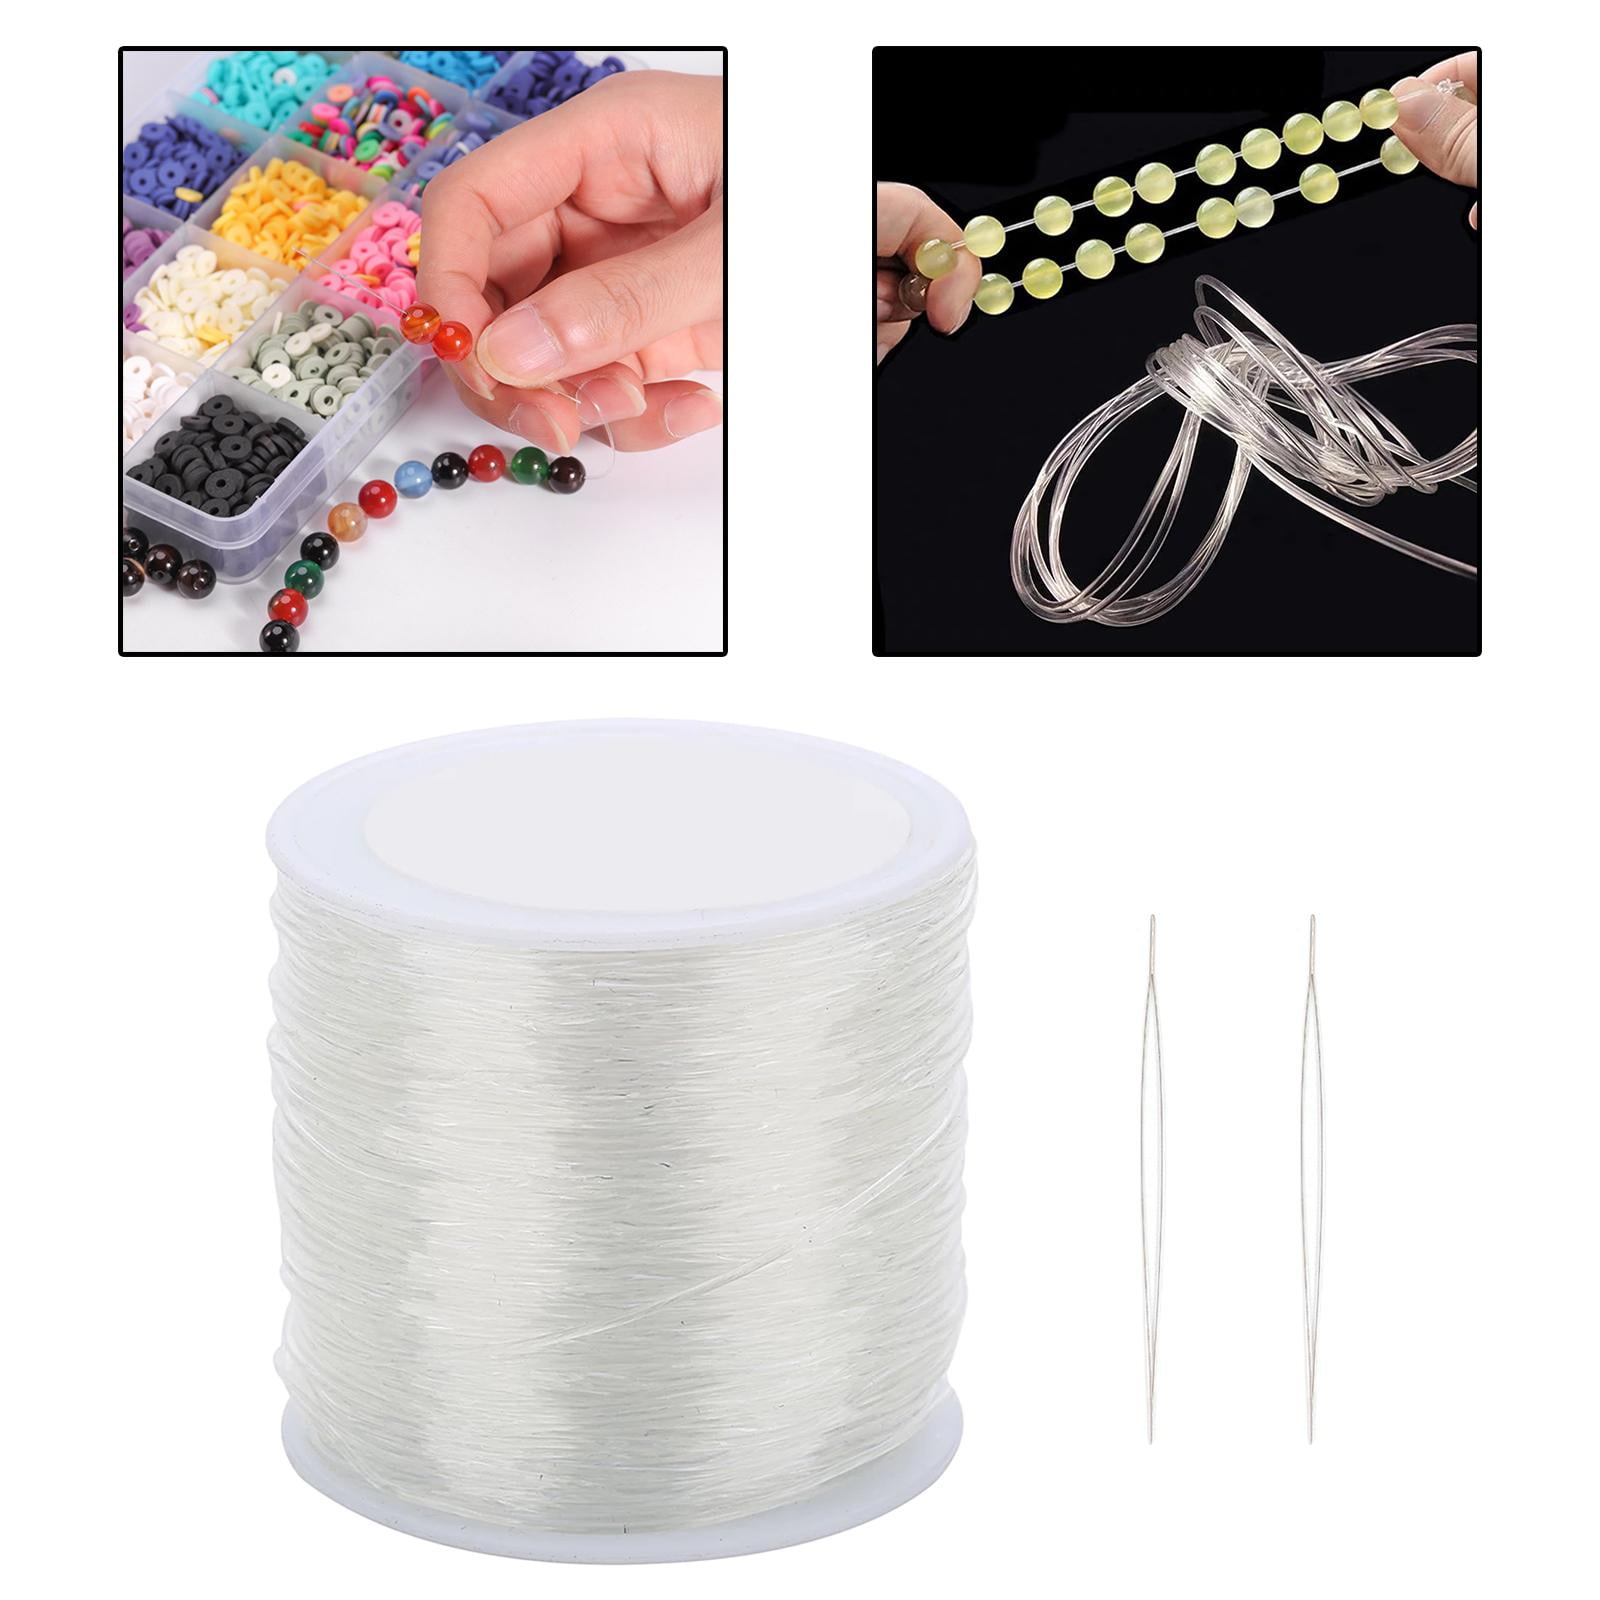 Stretchy String for Bracelets, Clear Elastic Cord Jewelry Bead Bracelet String with 2 Pcs Beading for Beads, Bracelets 1.5mm 55m, Women's